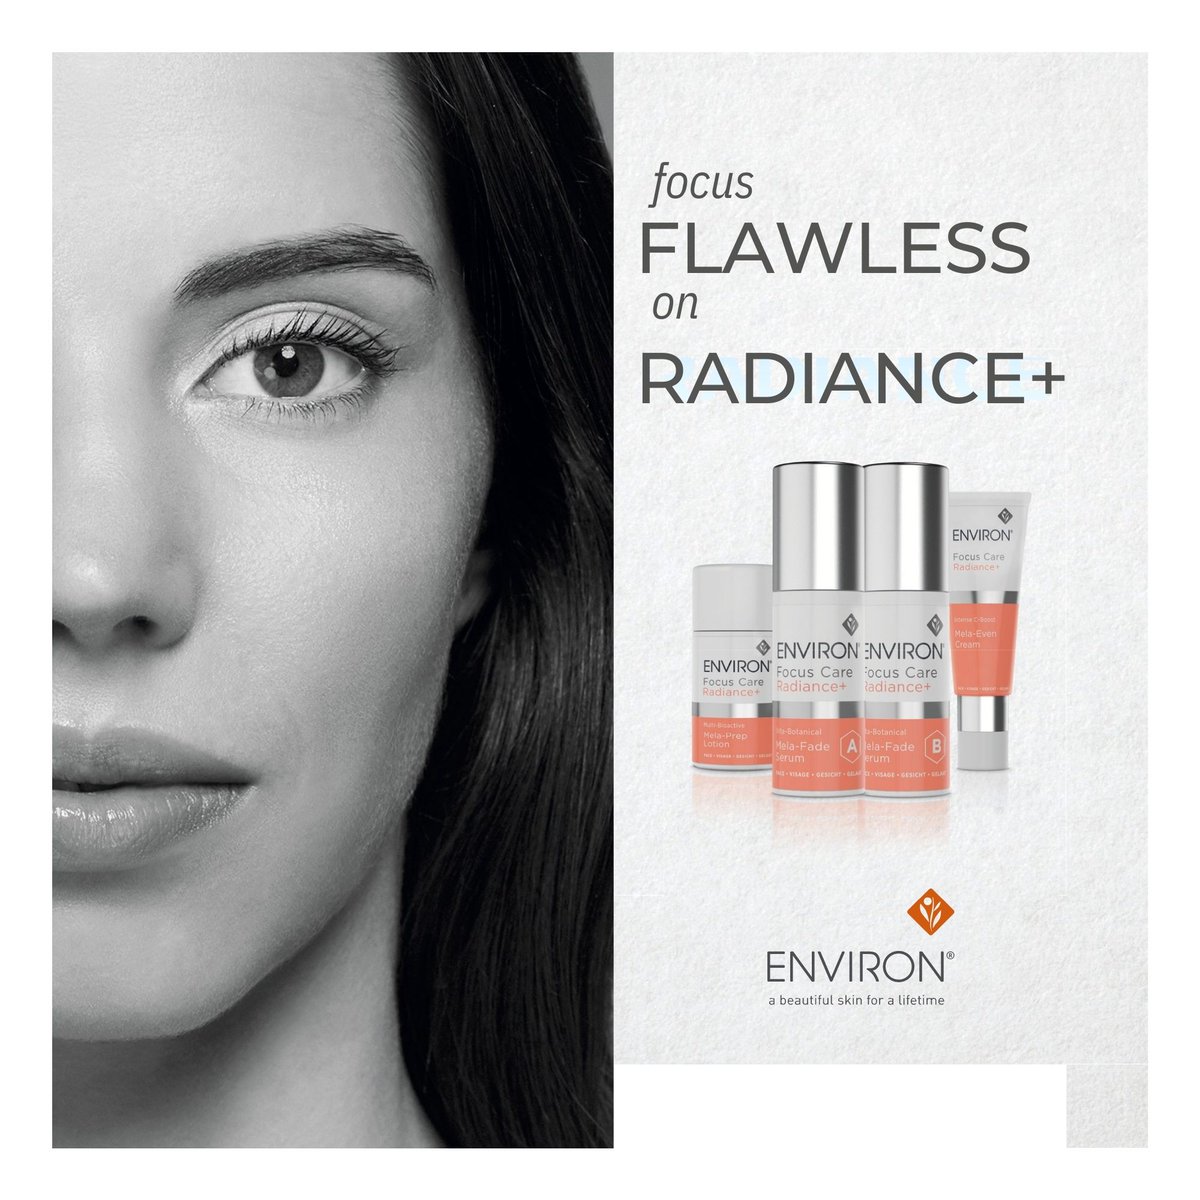 The Focus Care Radiance + range from Environ contains various combinations of scientifically researched ingredients that may assist in improving the appearance of an uneven skin tone. 

#environ #skincare #lookafteryourskin #cooganbergin #environstockist #enviroonline